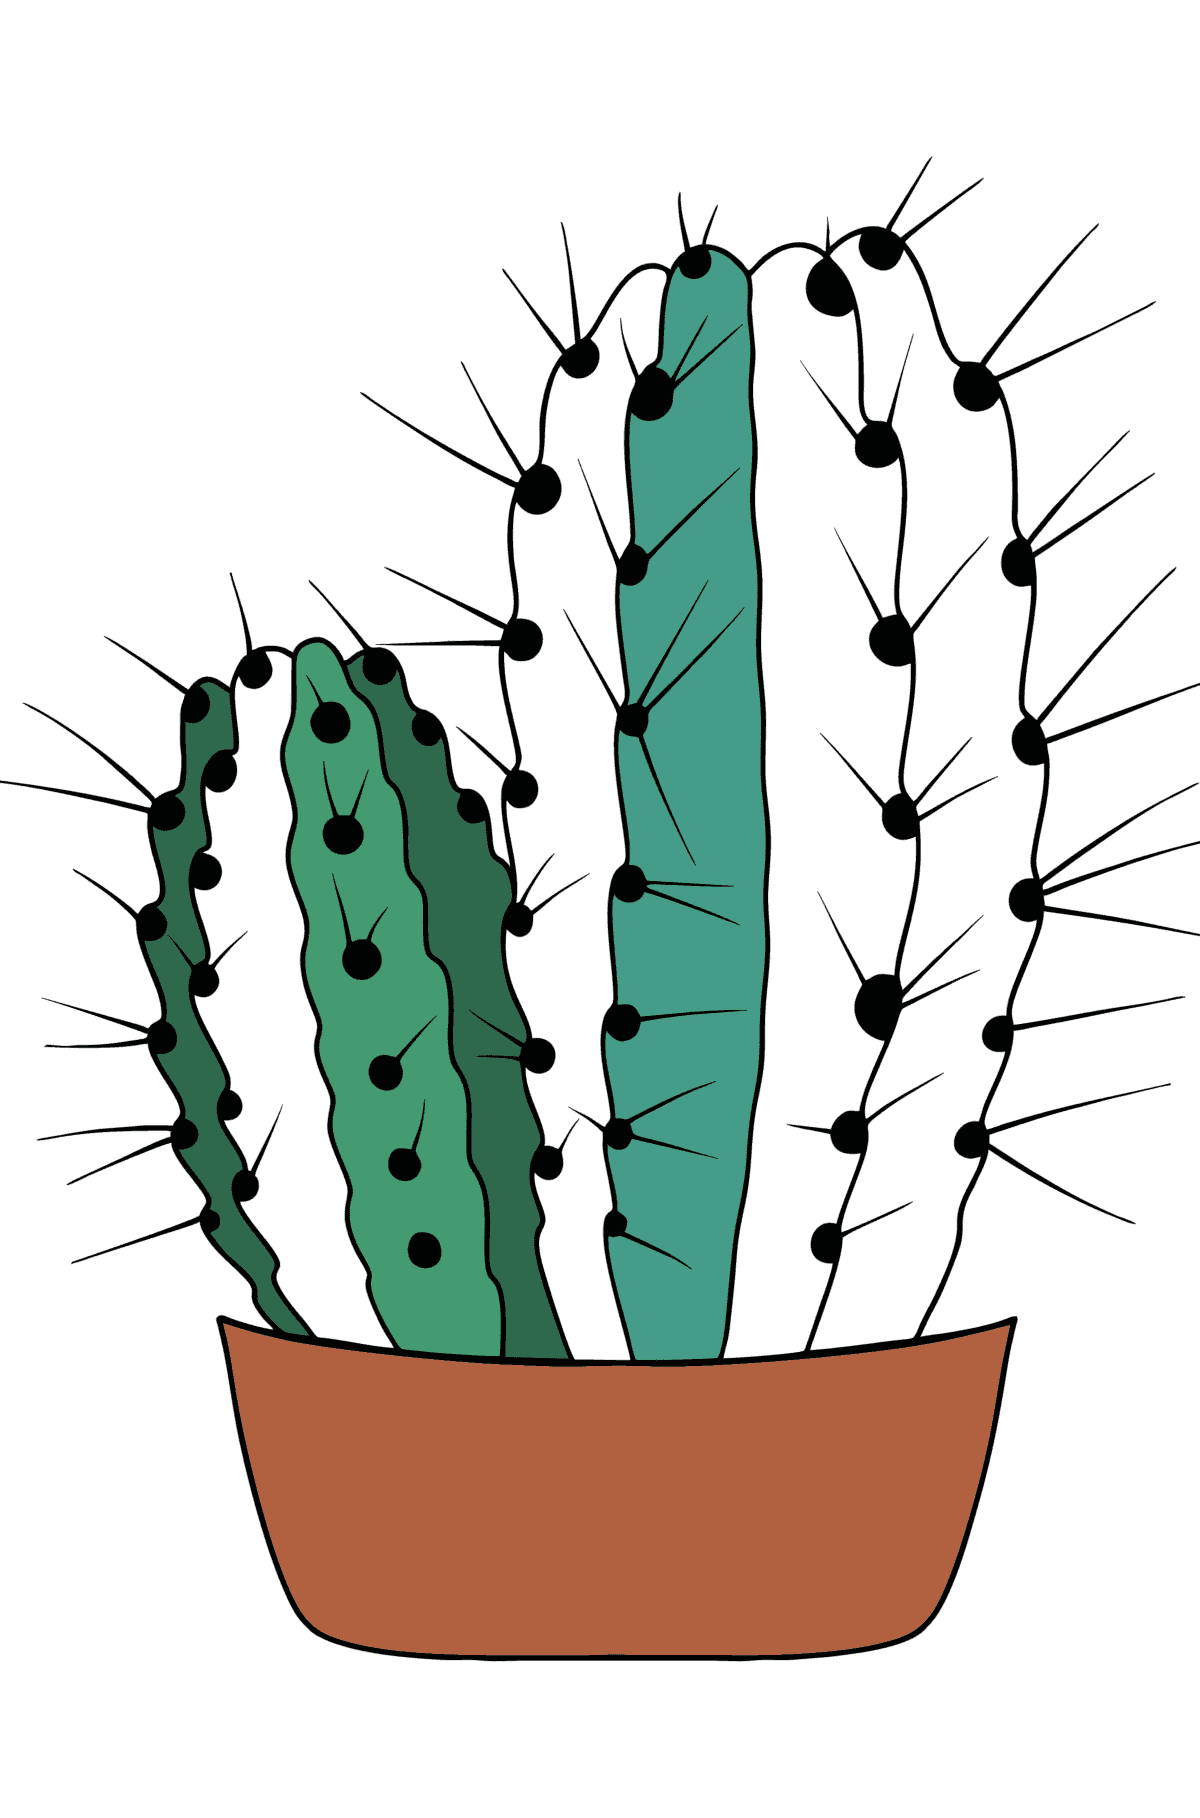 Easy cactus coloring page - Coloring Pages for Kids